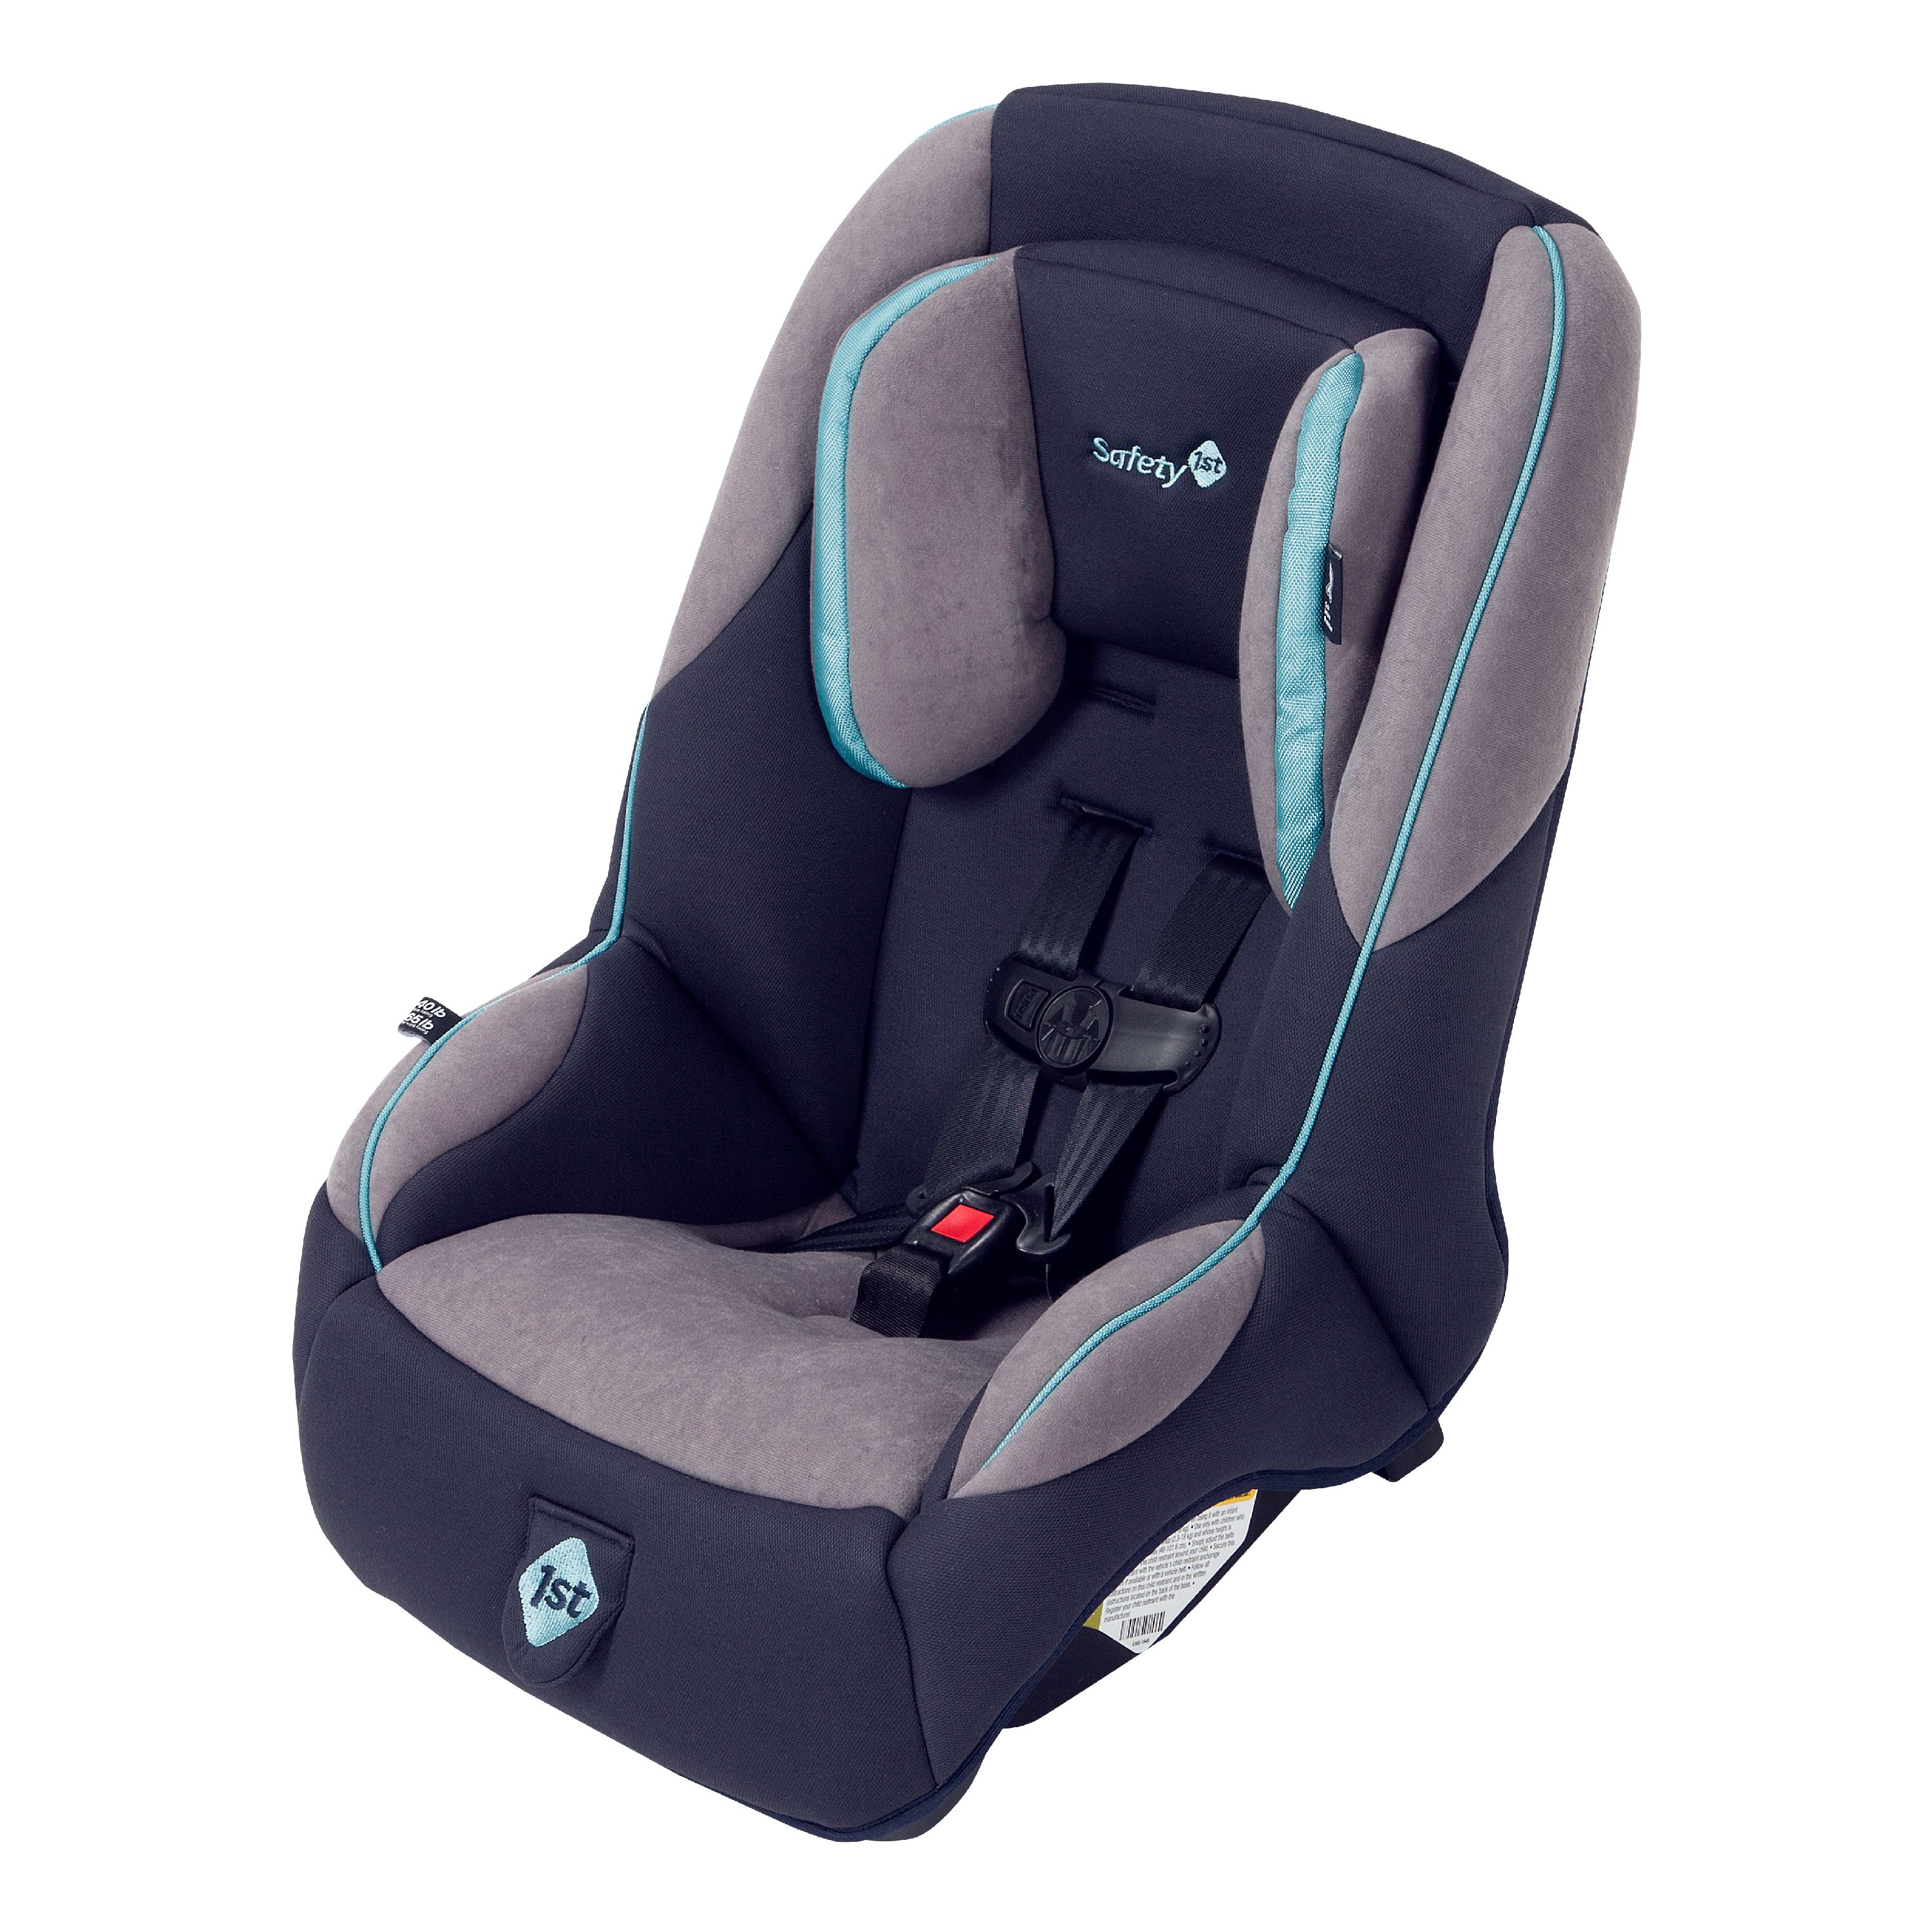 Safety 1st Guide 65 Sport Convertible Car Seat - image 3 of 14